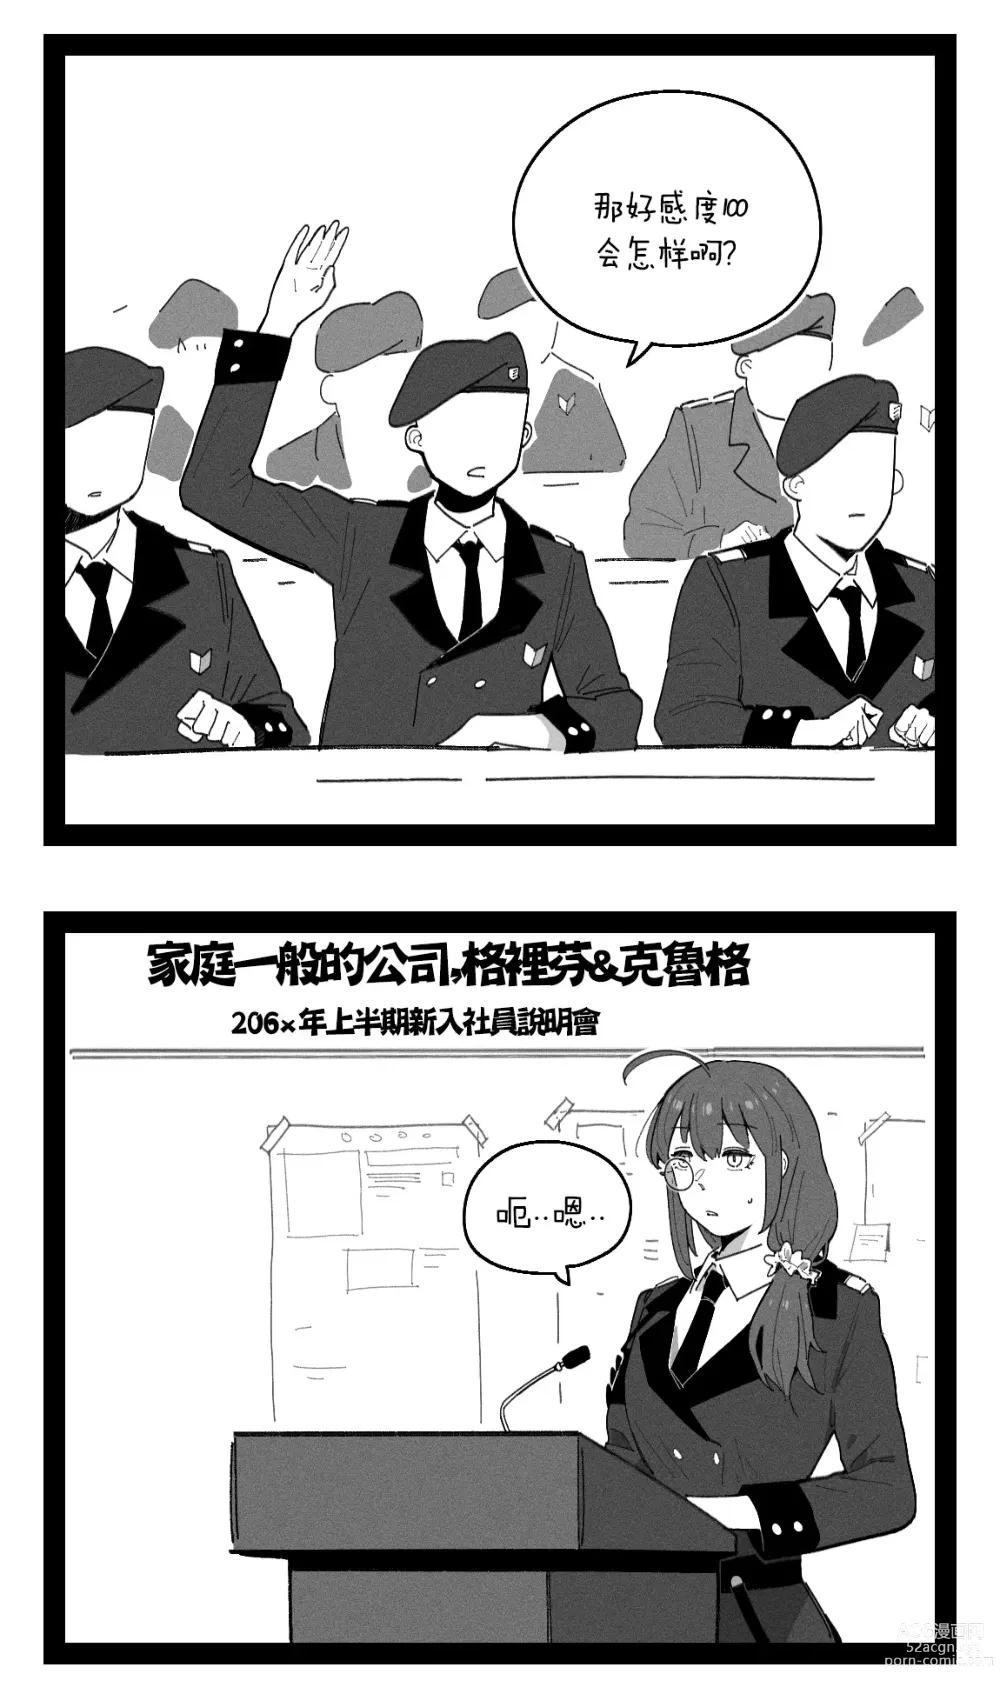 Page 3 of doujinshi Griffin Commanders (decensored)